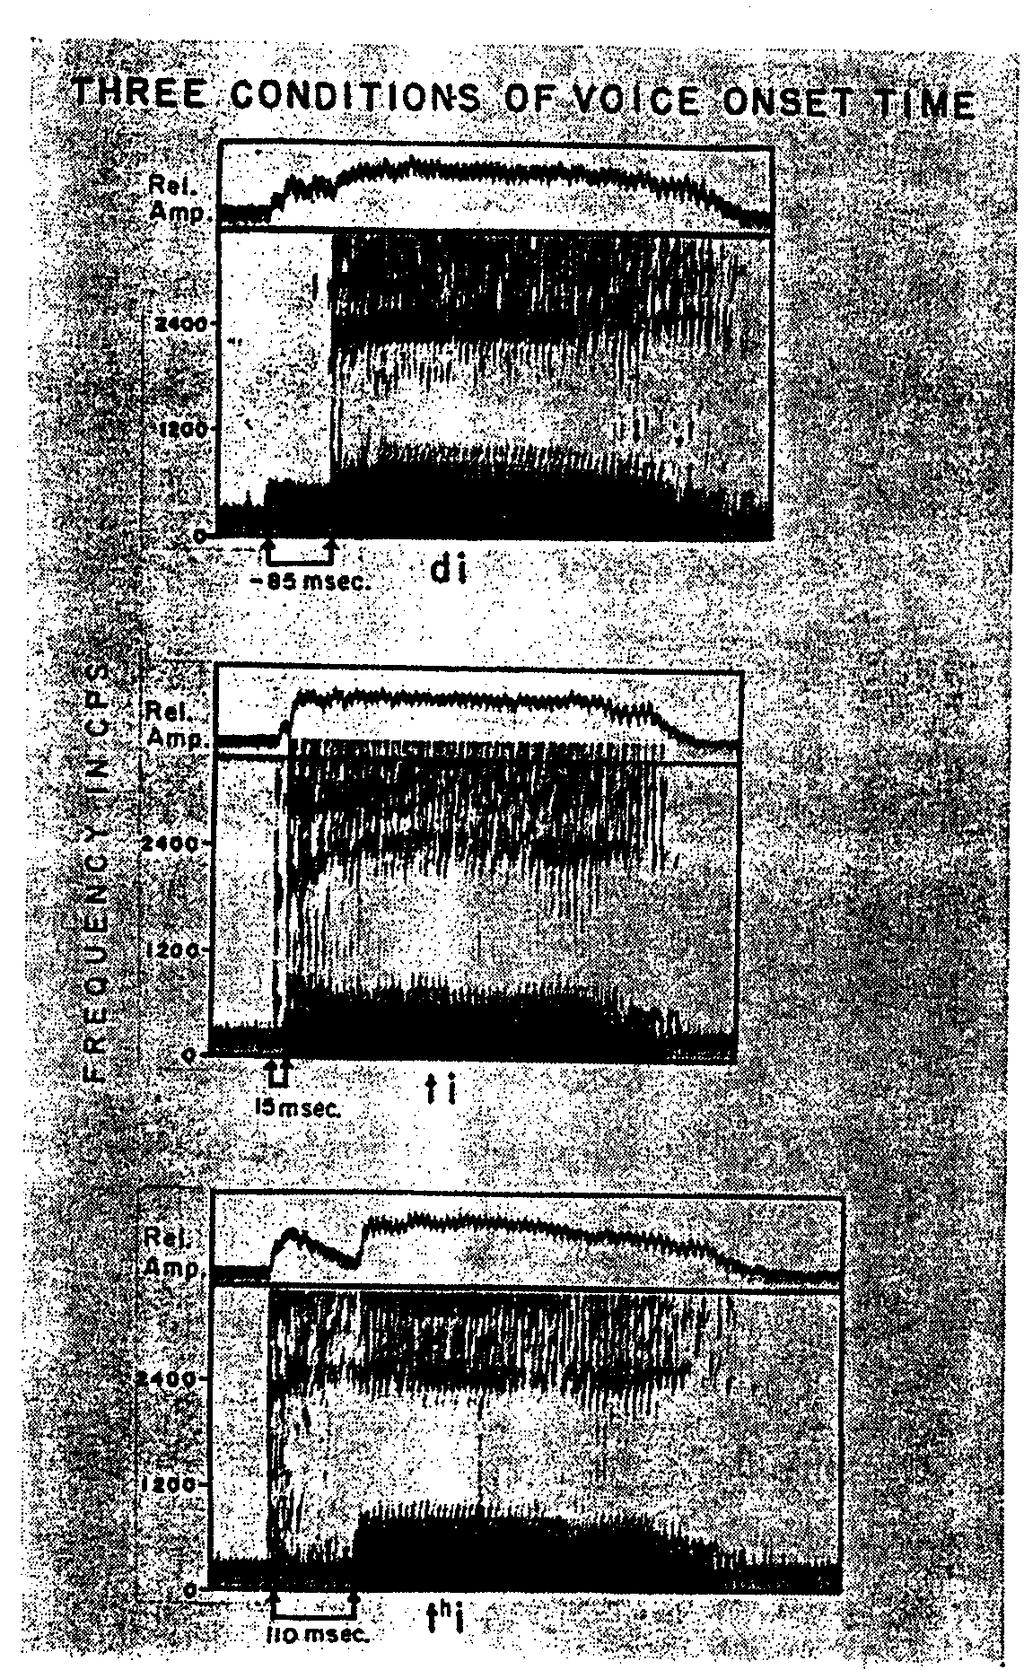 and unaspirated. In the second spectrogram, illustrating short lag, the release of the stop occurs a little bit before voice onset, leading to the classification of a voiceless unaspirated stop.